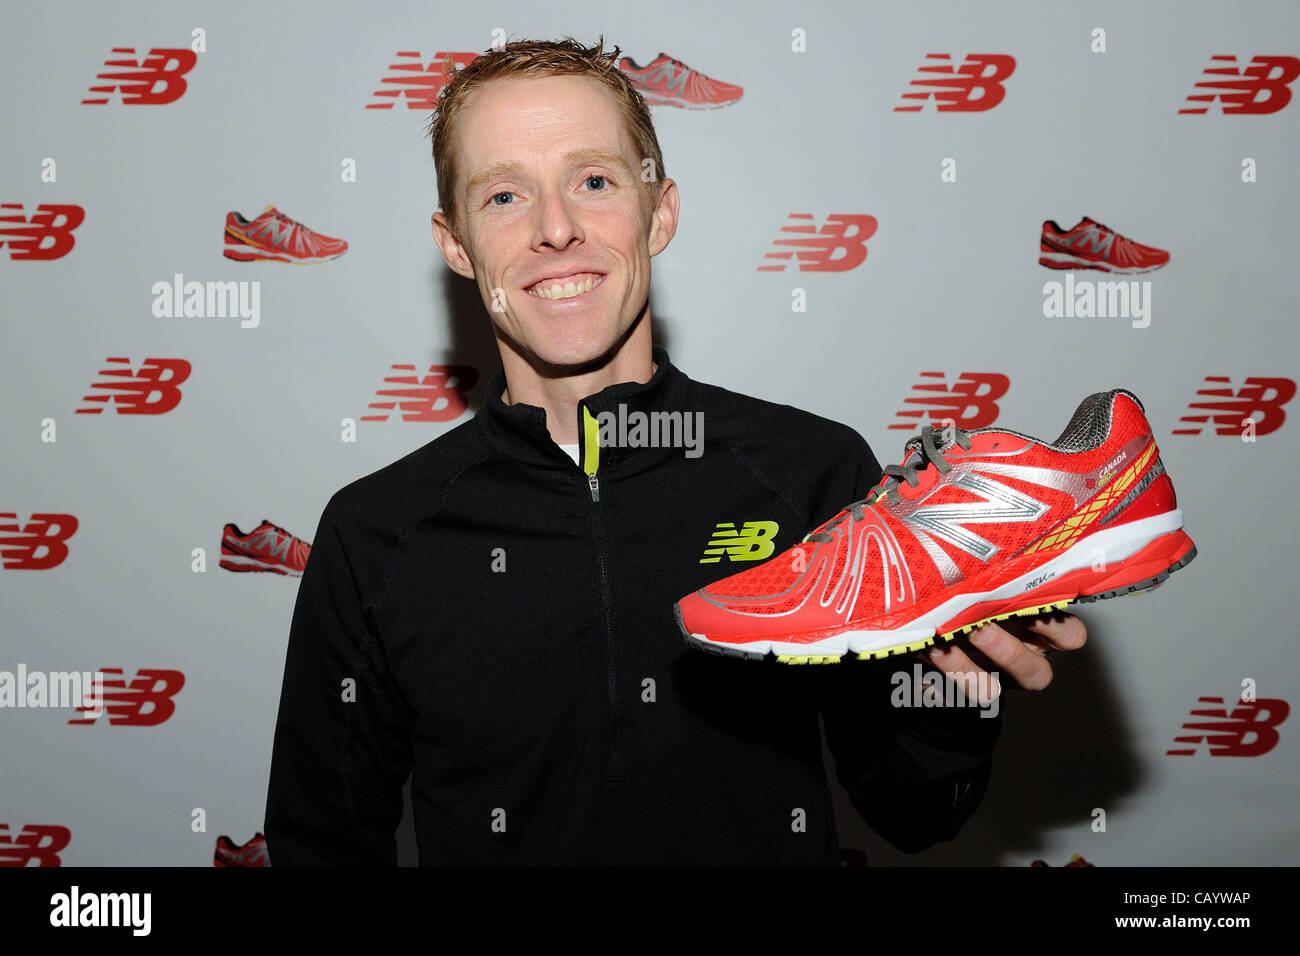 May 10, 2012 - Toronto, Canada - New Balance Canada hosts a preview of New  Balance 890 Canada Limited Edition shoe in celebration of Canadian Olympic  Marathoners Eric Gillis and Reid Coolsaet